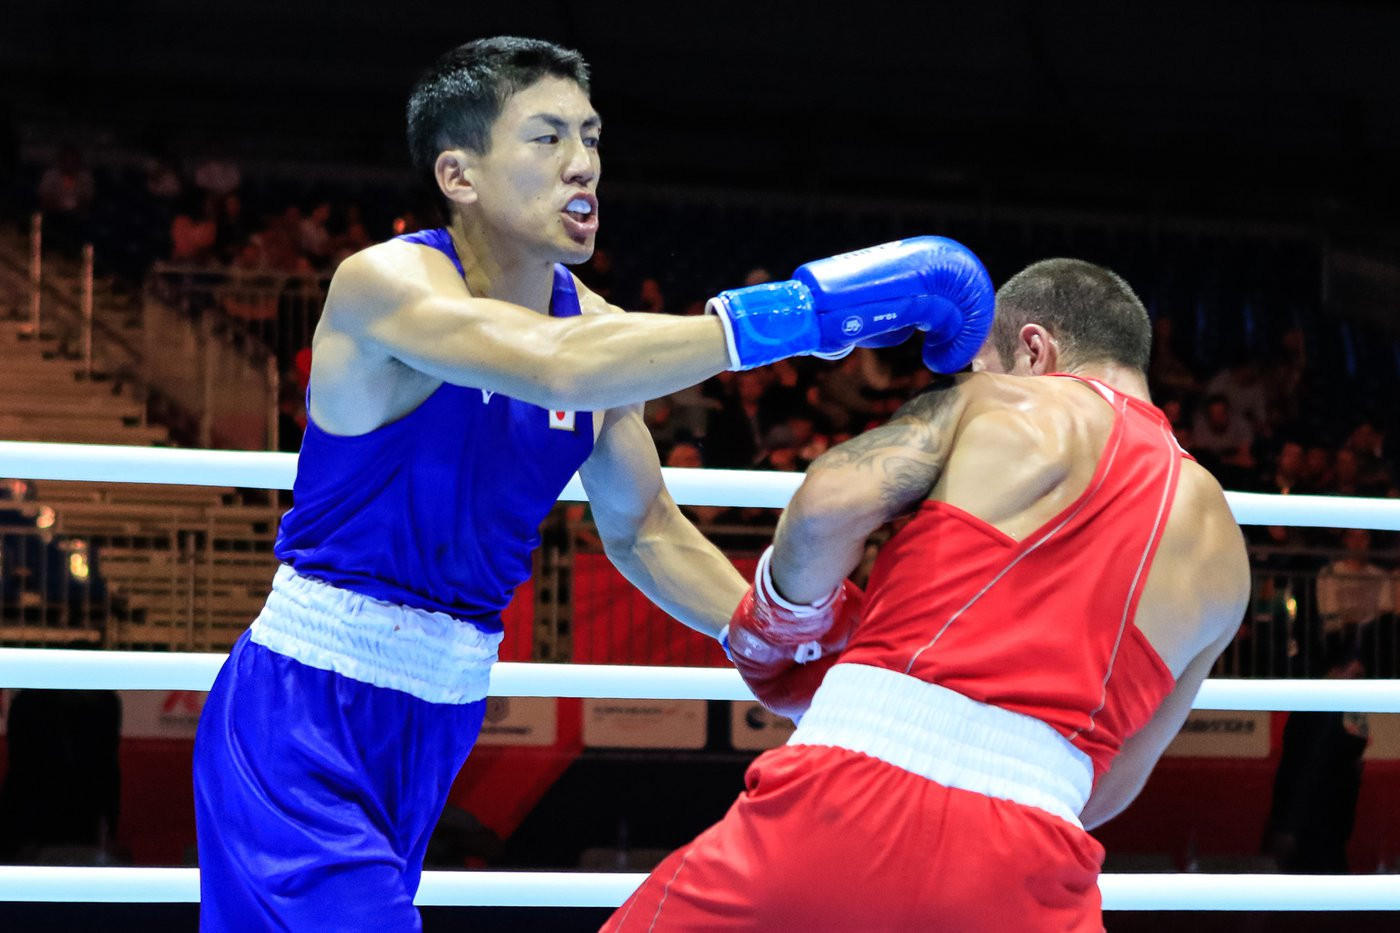 Daisuke Narimatsu of Japan defeated Otar Eranosyan 4-0, knocking the light welterweight fifth seed out of the competition ©Yekaterinburg 2019